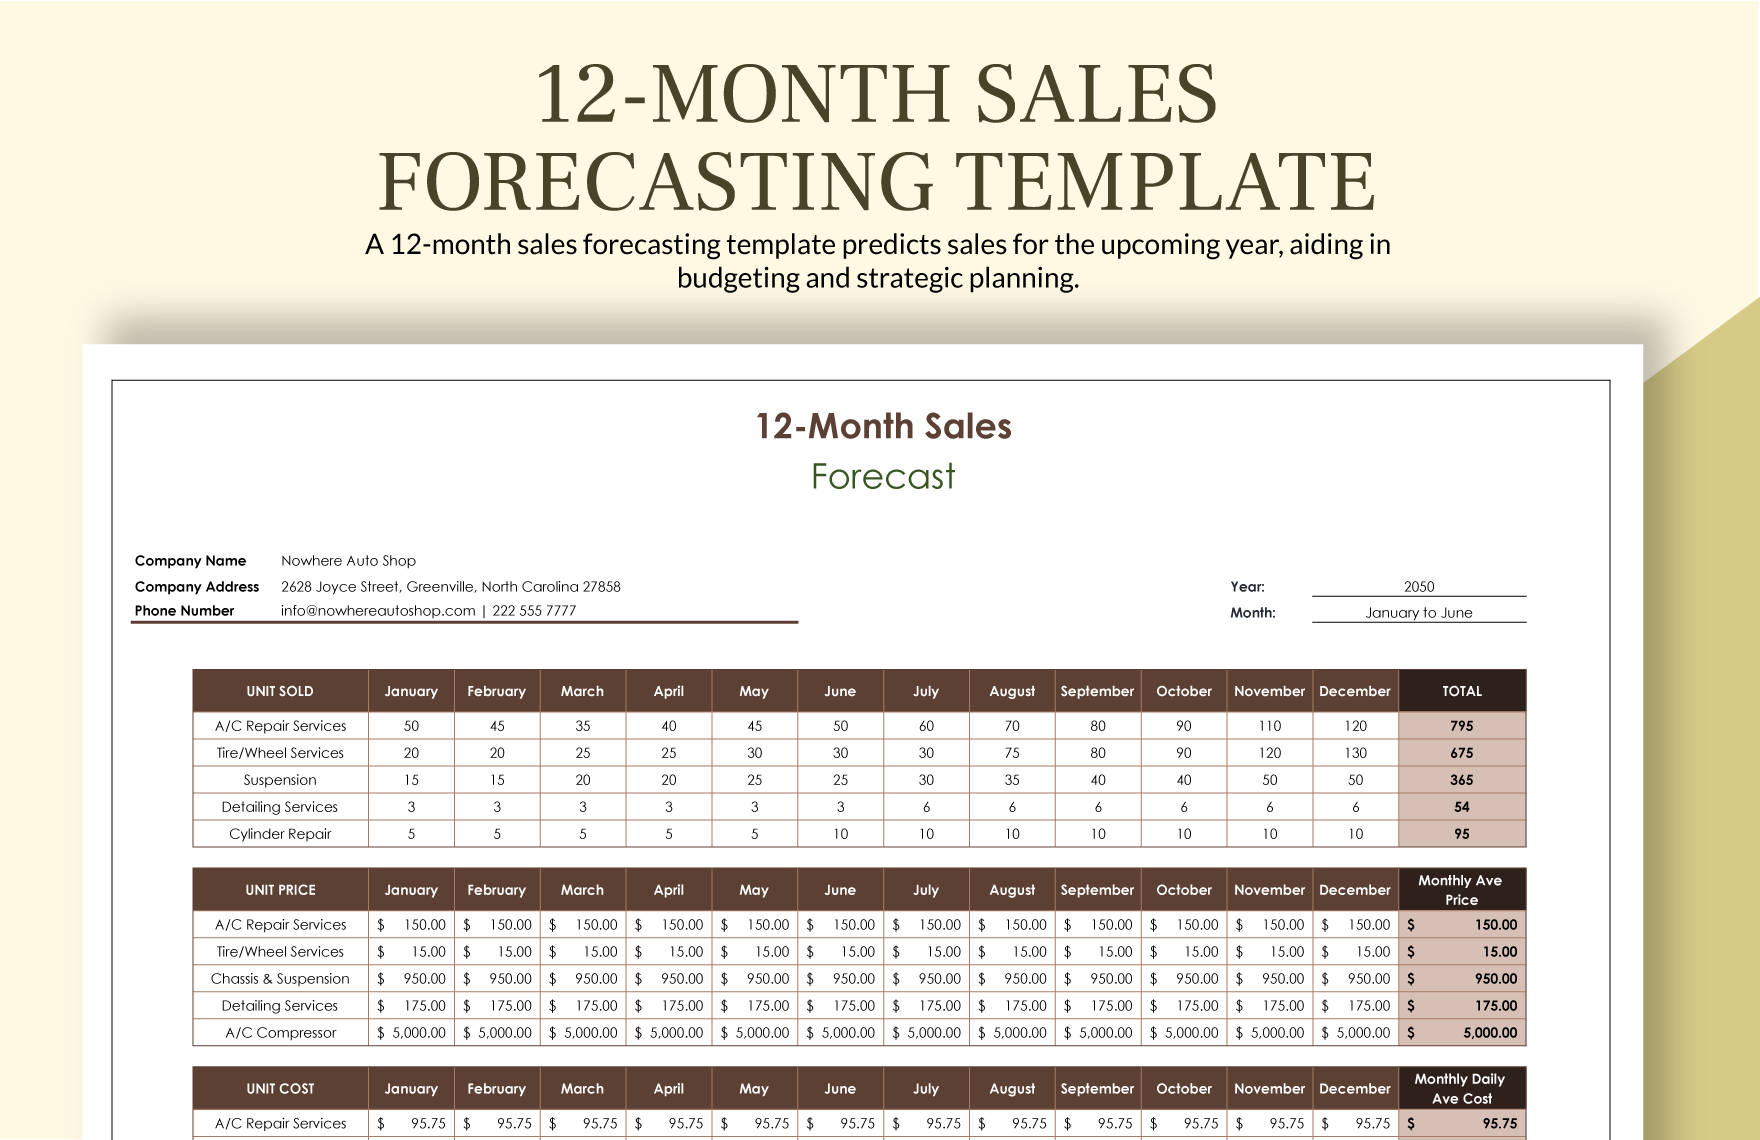 12-month Sales Forecasting Template